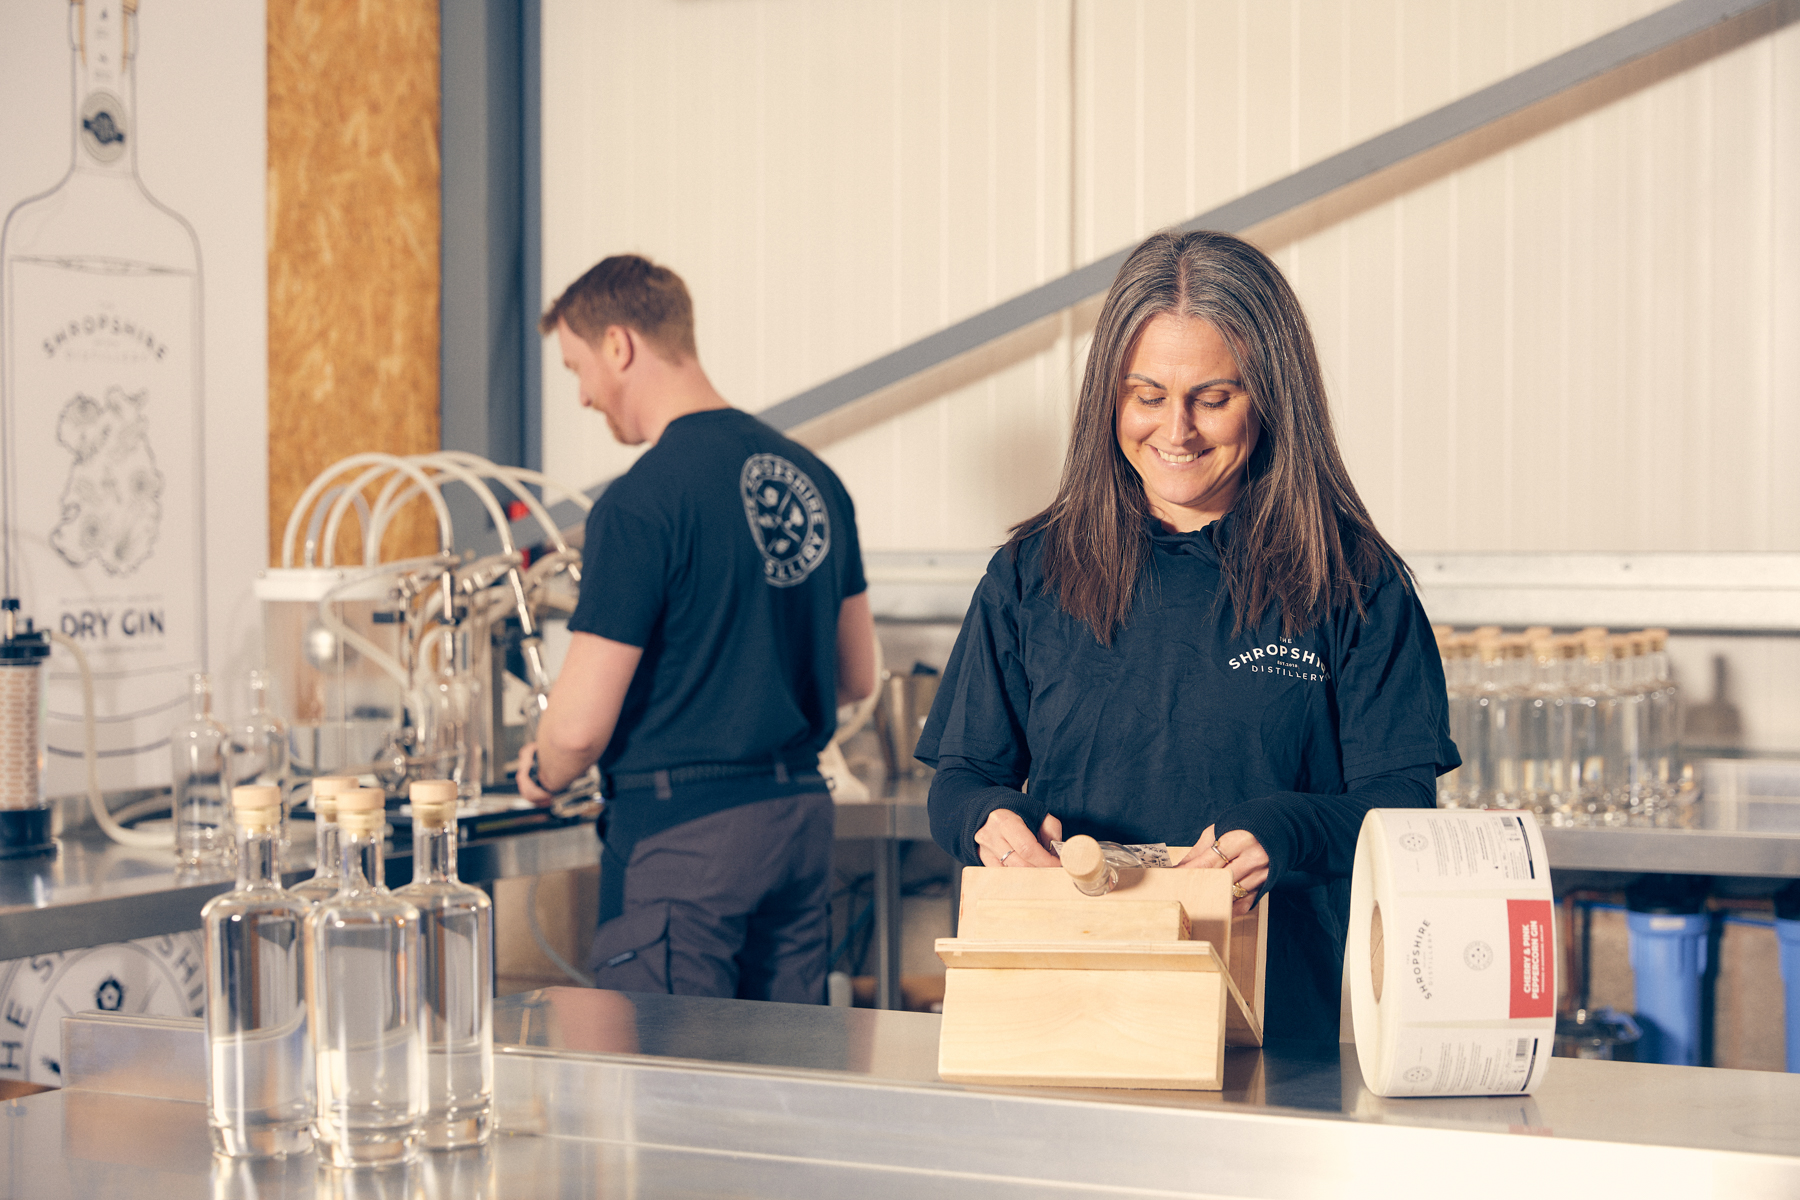 The Shropshire Distillery passion is creating artisan gin in their state of the art distillery